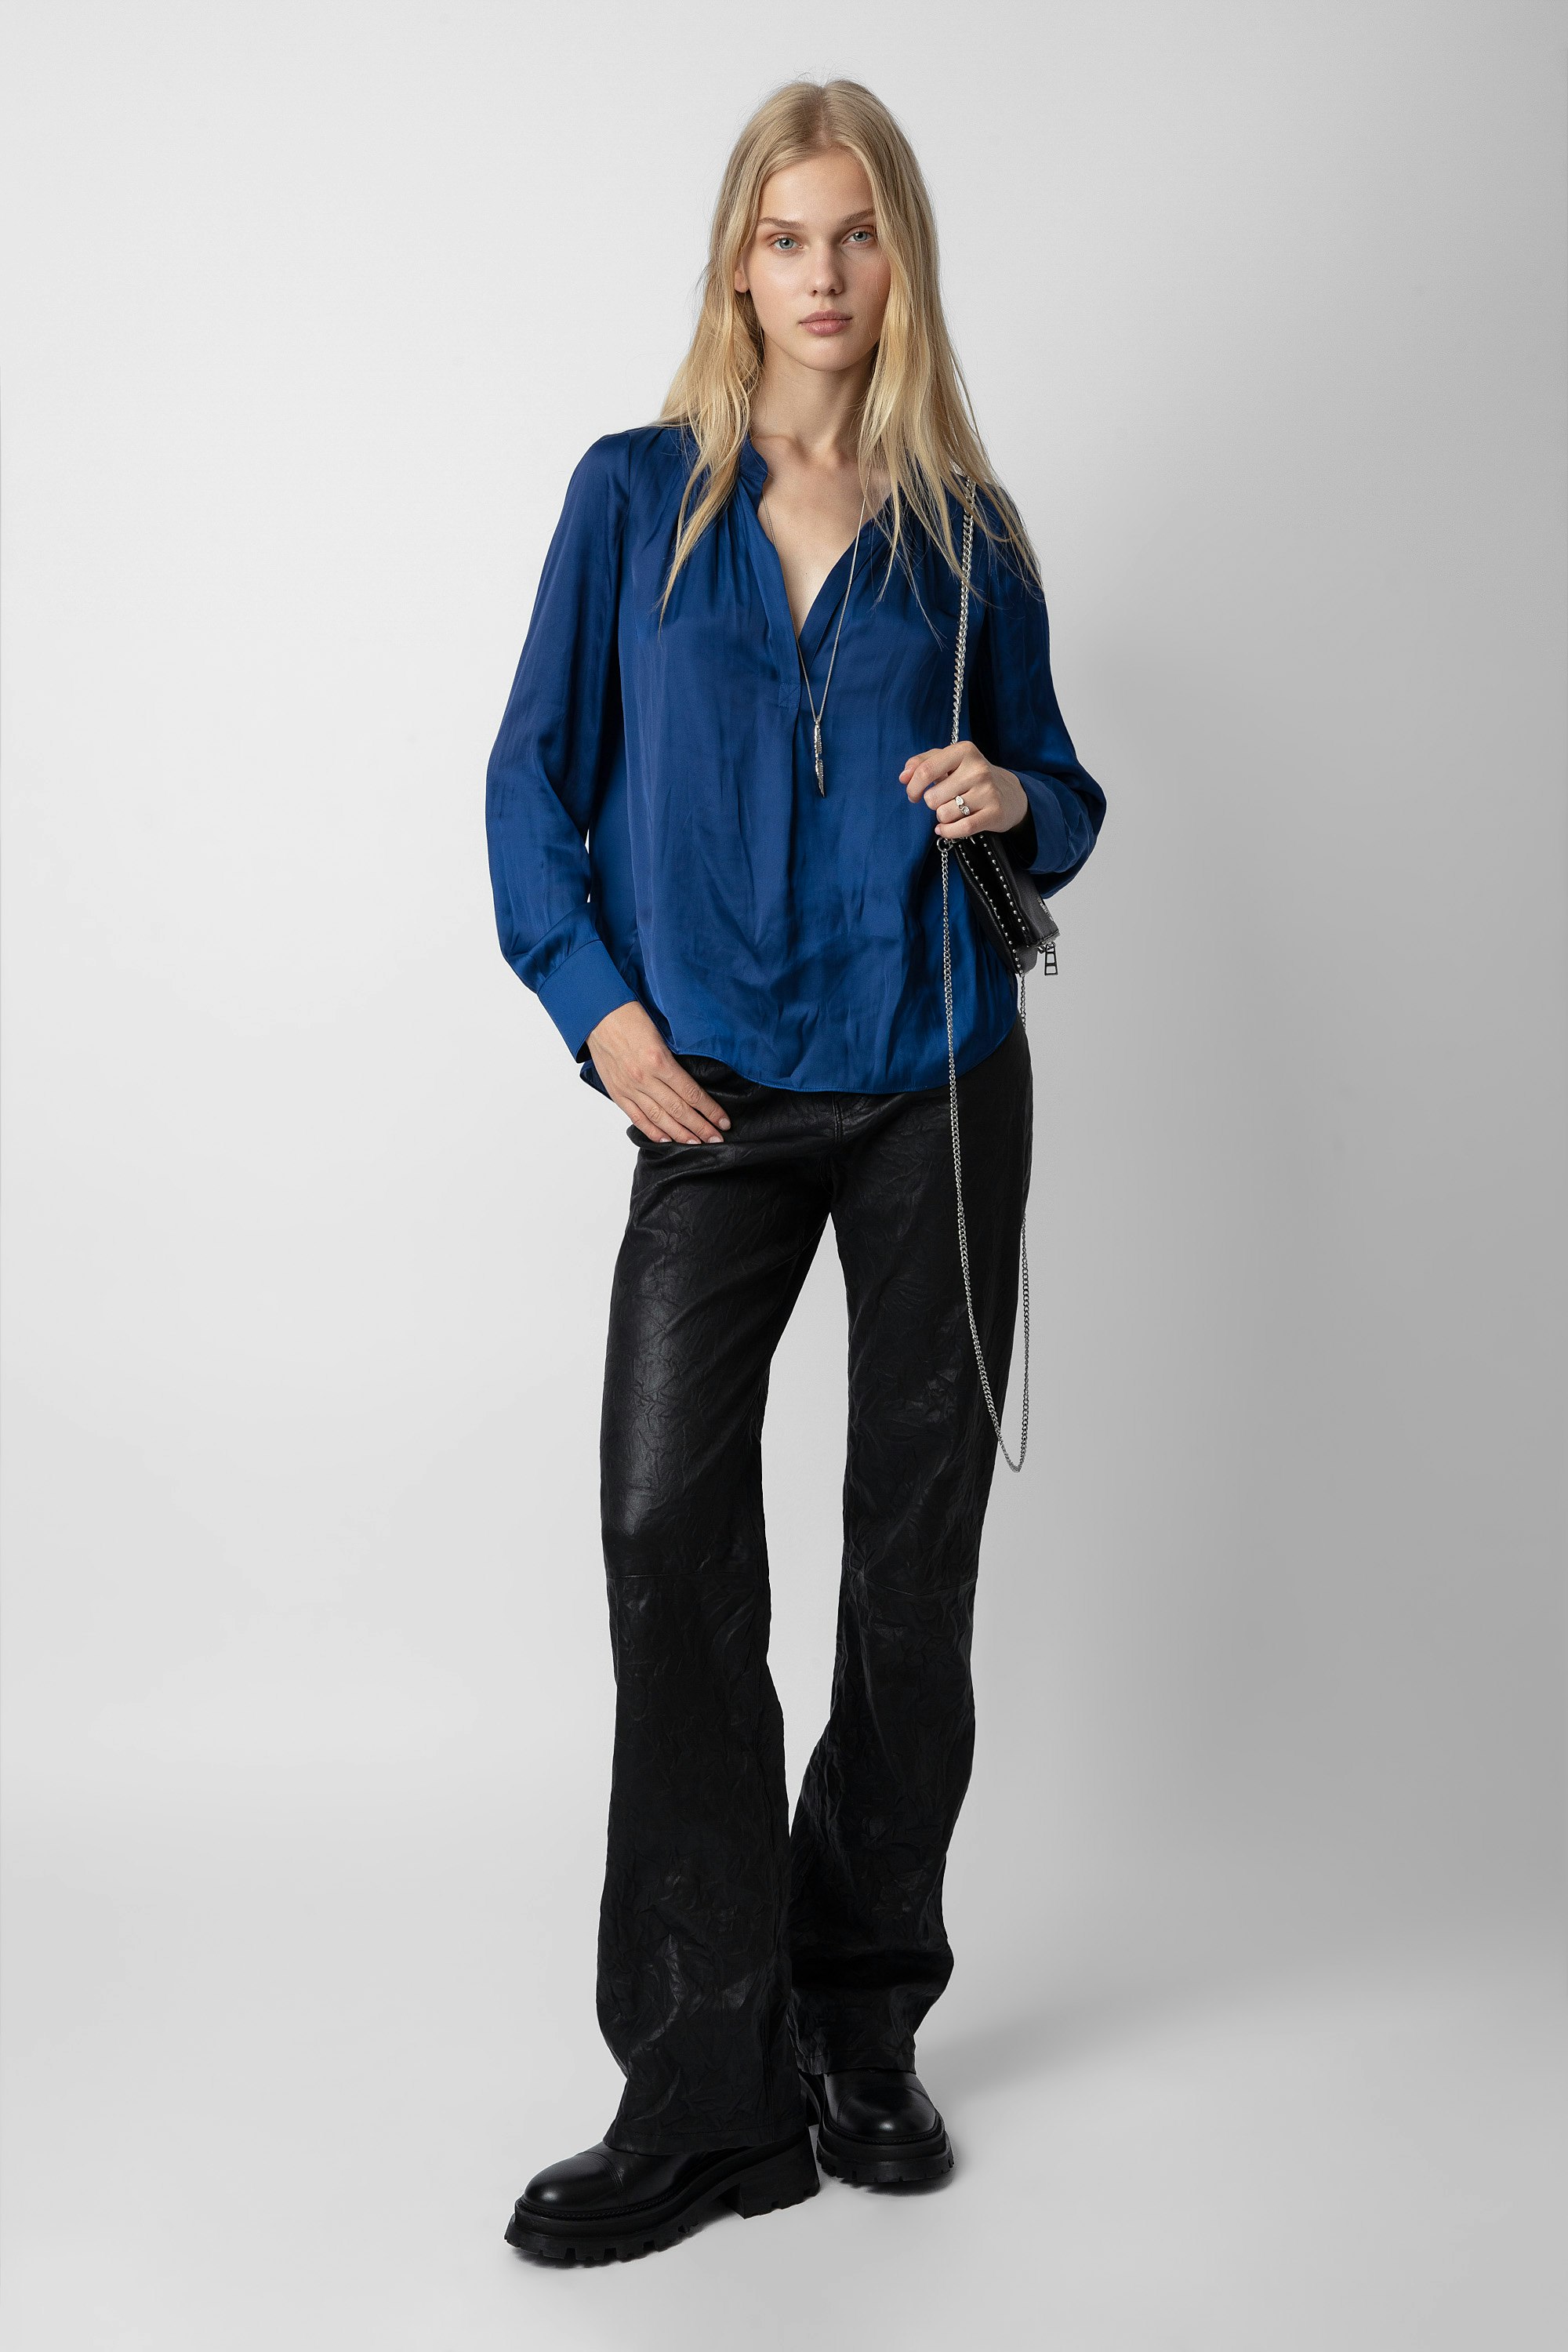 Tink Satin Blouse - Women’s royal blue blouse with open collar.